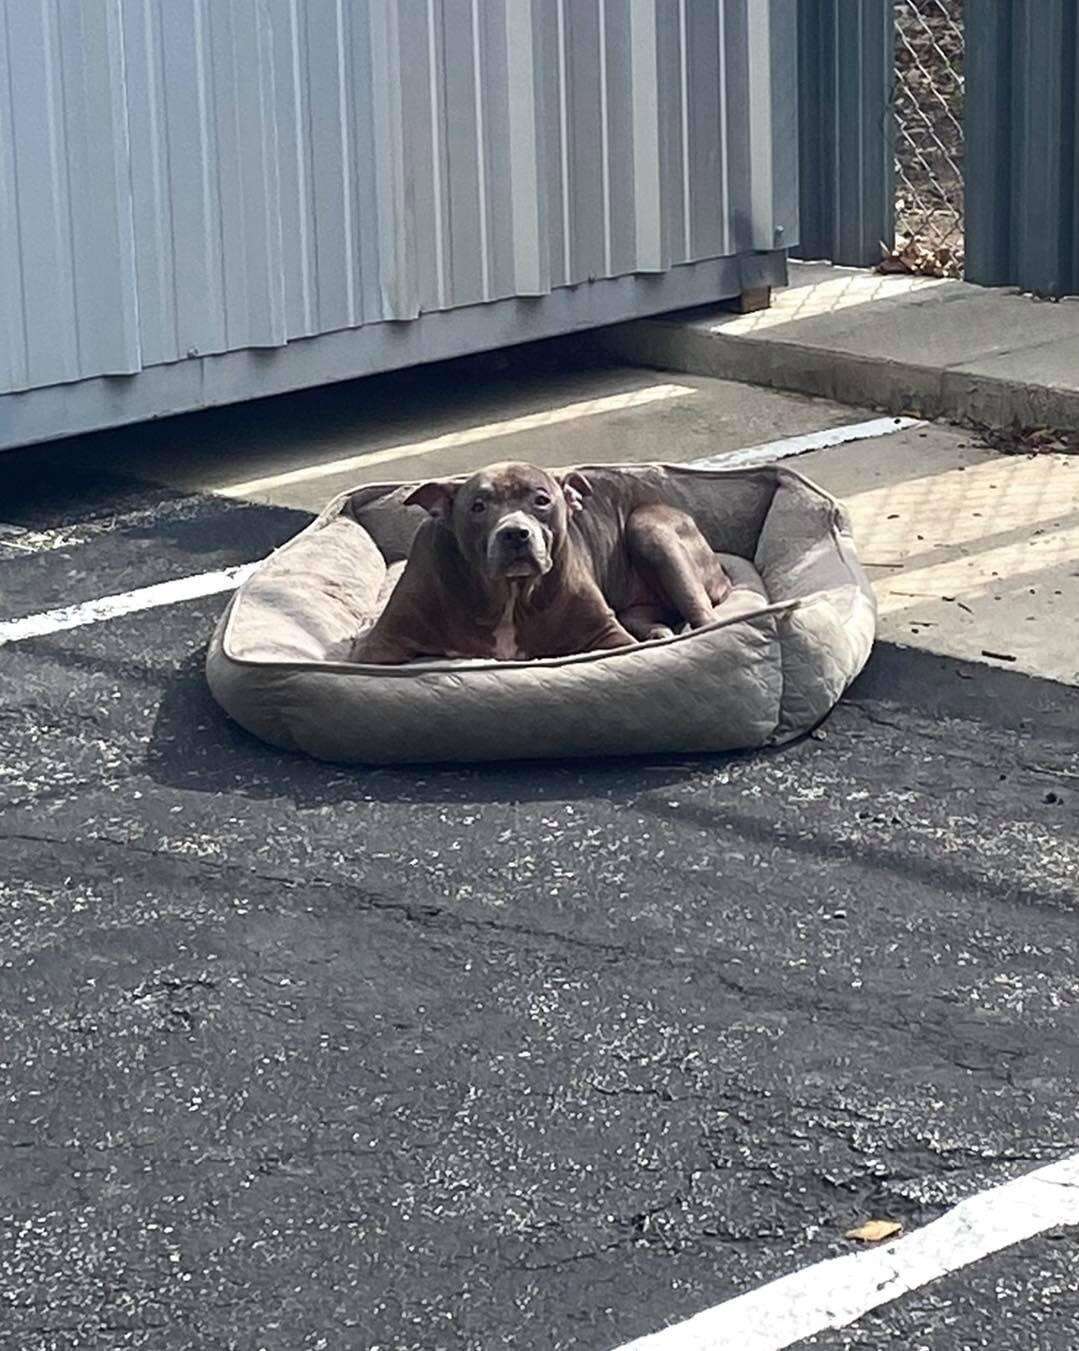 Dog abandoned in parking lot with her bed